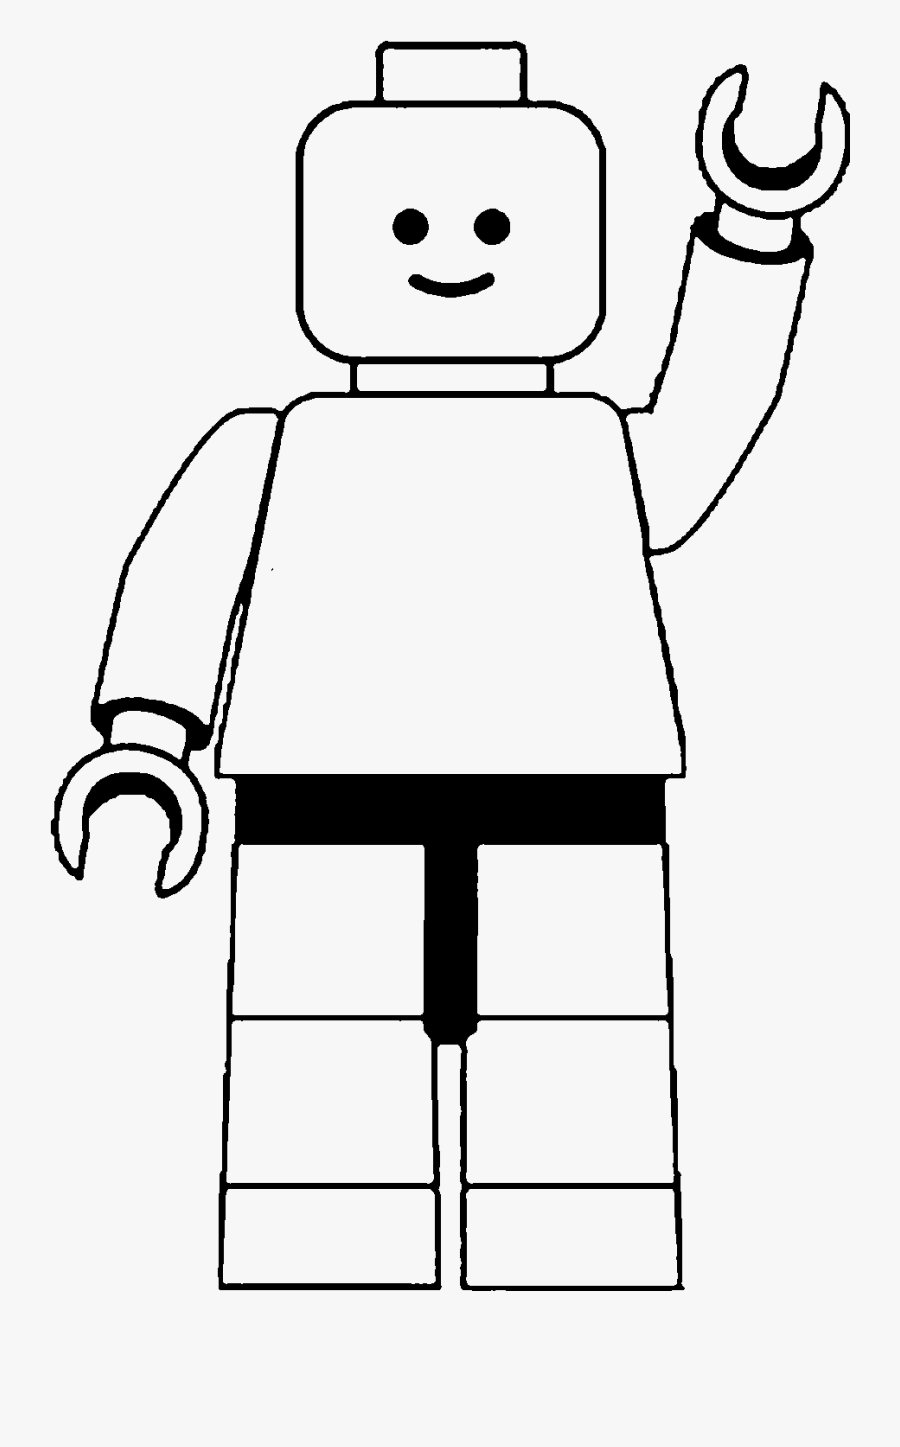 Lego Clipart Black And White, Transparent Clipart